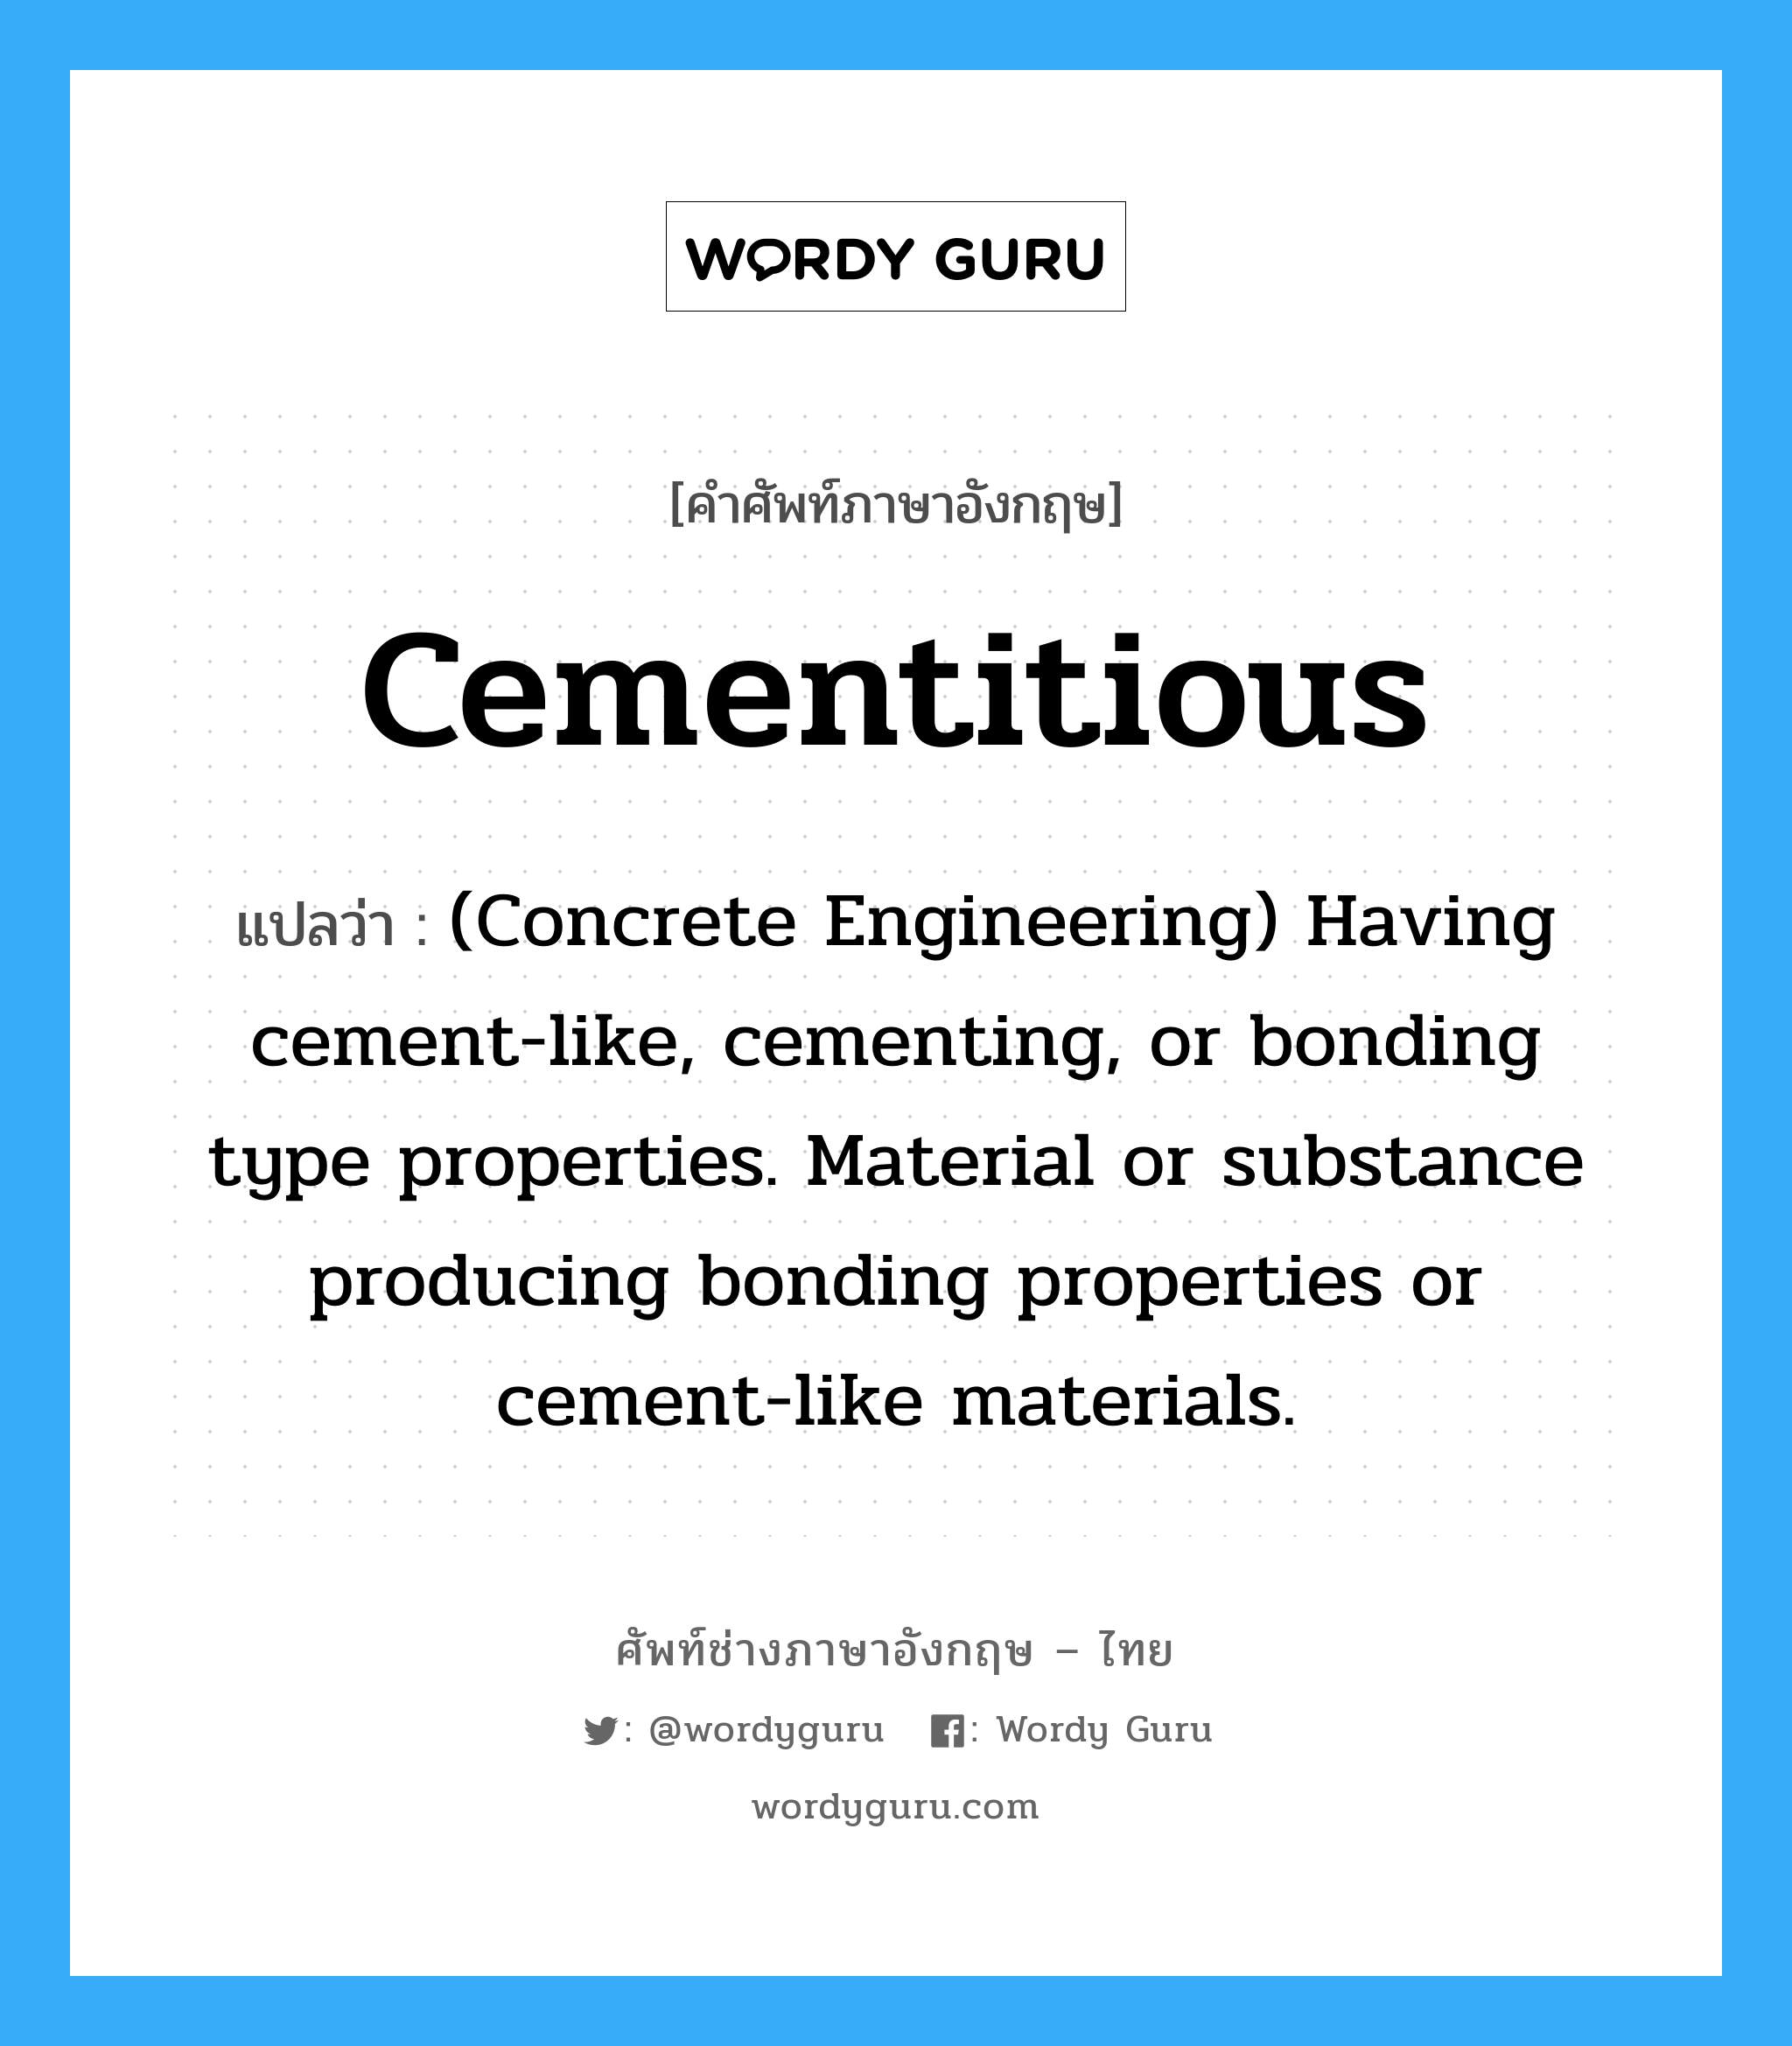 (Concrete Engineering) Having cement-like, cementing, or bonding type properties. Material or substance producing bonding properties or cement-like materials. ภาษาอังกฤษ?, คำศัพท์ช่างภาษาอังกฤษ - ไทย (Concrete Engineering) Having cement-like, cementing, or bonding type properties. Material or substance producing bonding properties or cement-like materials. คำศัพท์ภาษาอังกฤษ (Concrete Engineering) Having cement-like, cementing, or bonding type properties. Material or substance producing bonding properties or cement-like materials. แปลว่า Cementitious